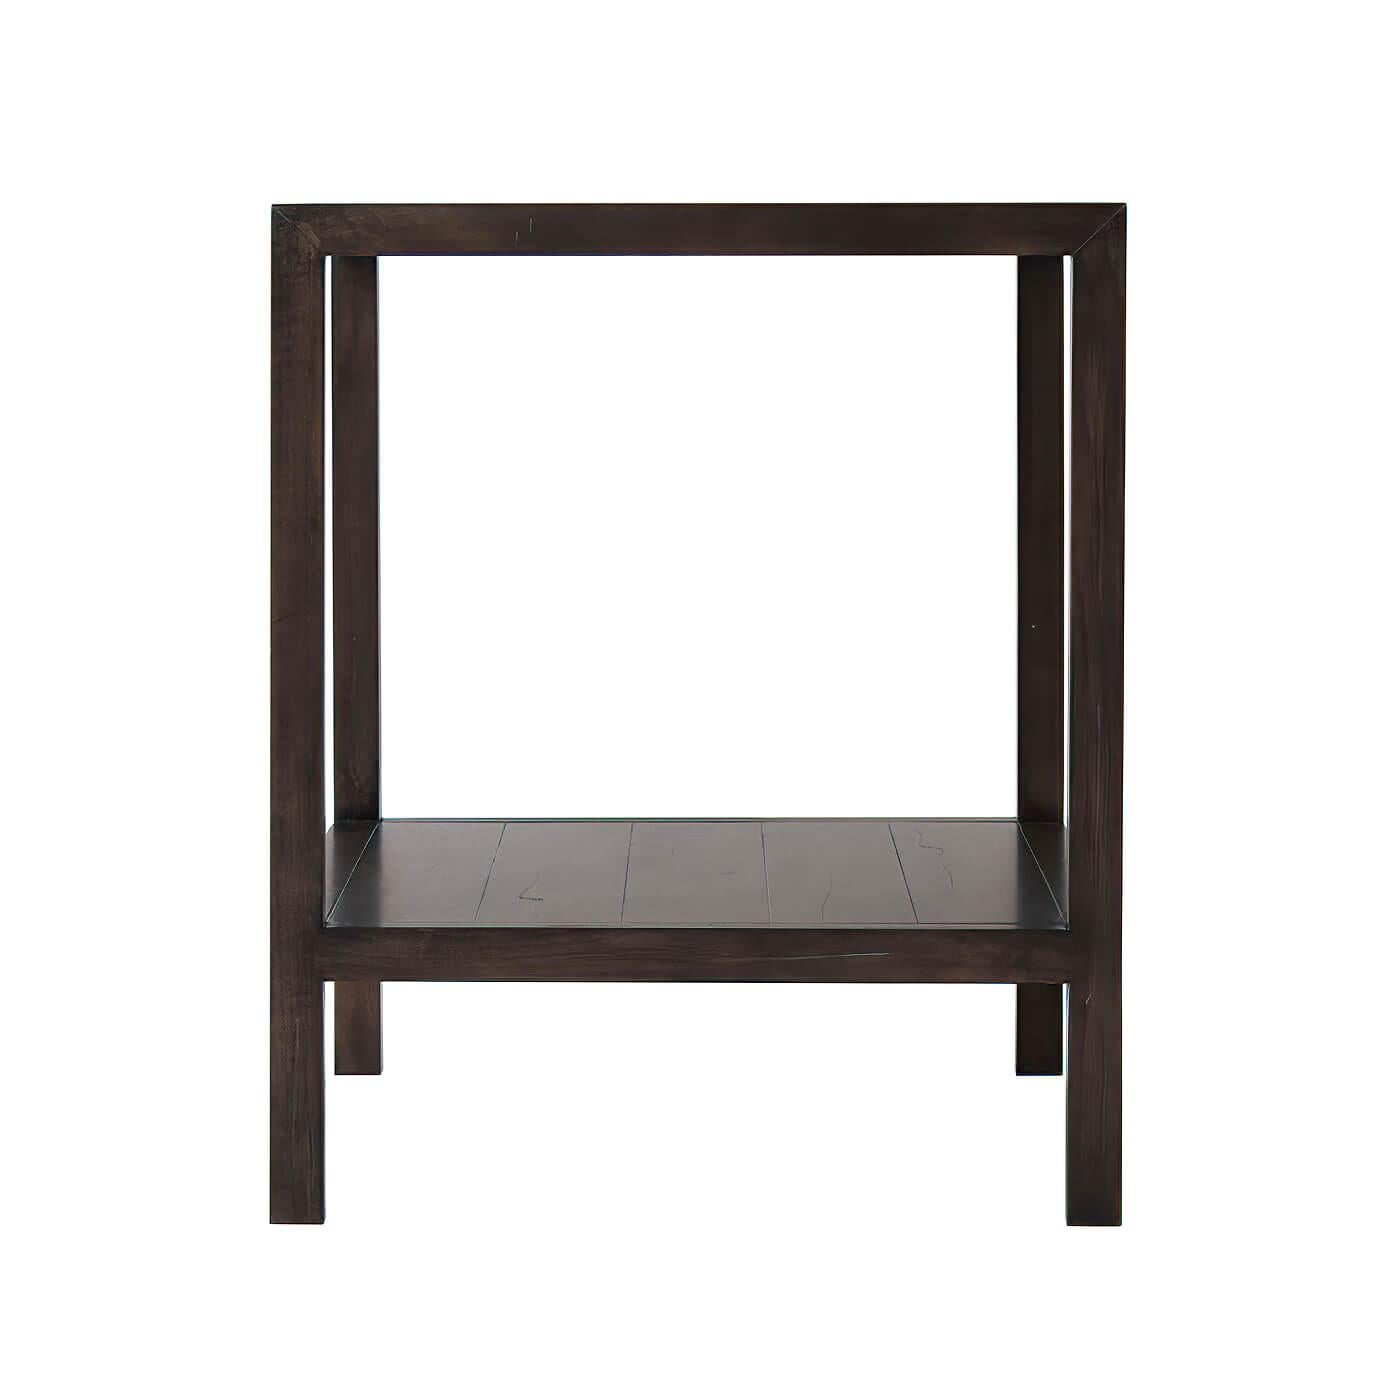 Modern two-tier rectangular accent table with a Cocoa Finish.

Dimensions: 28